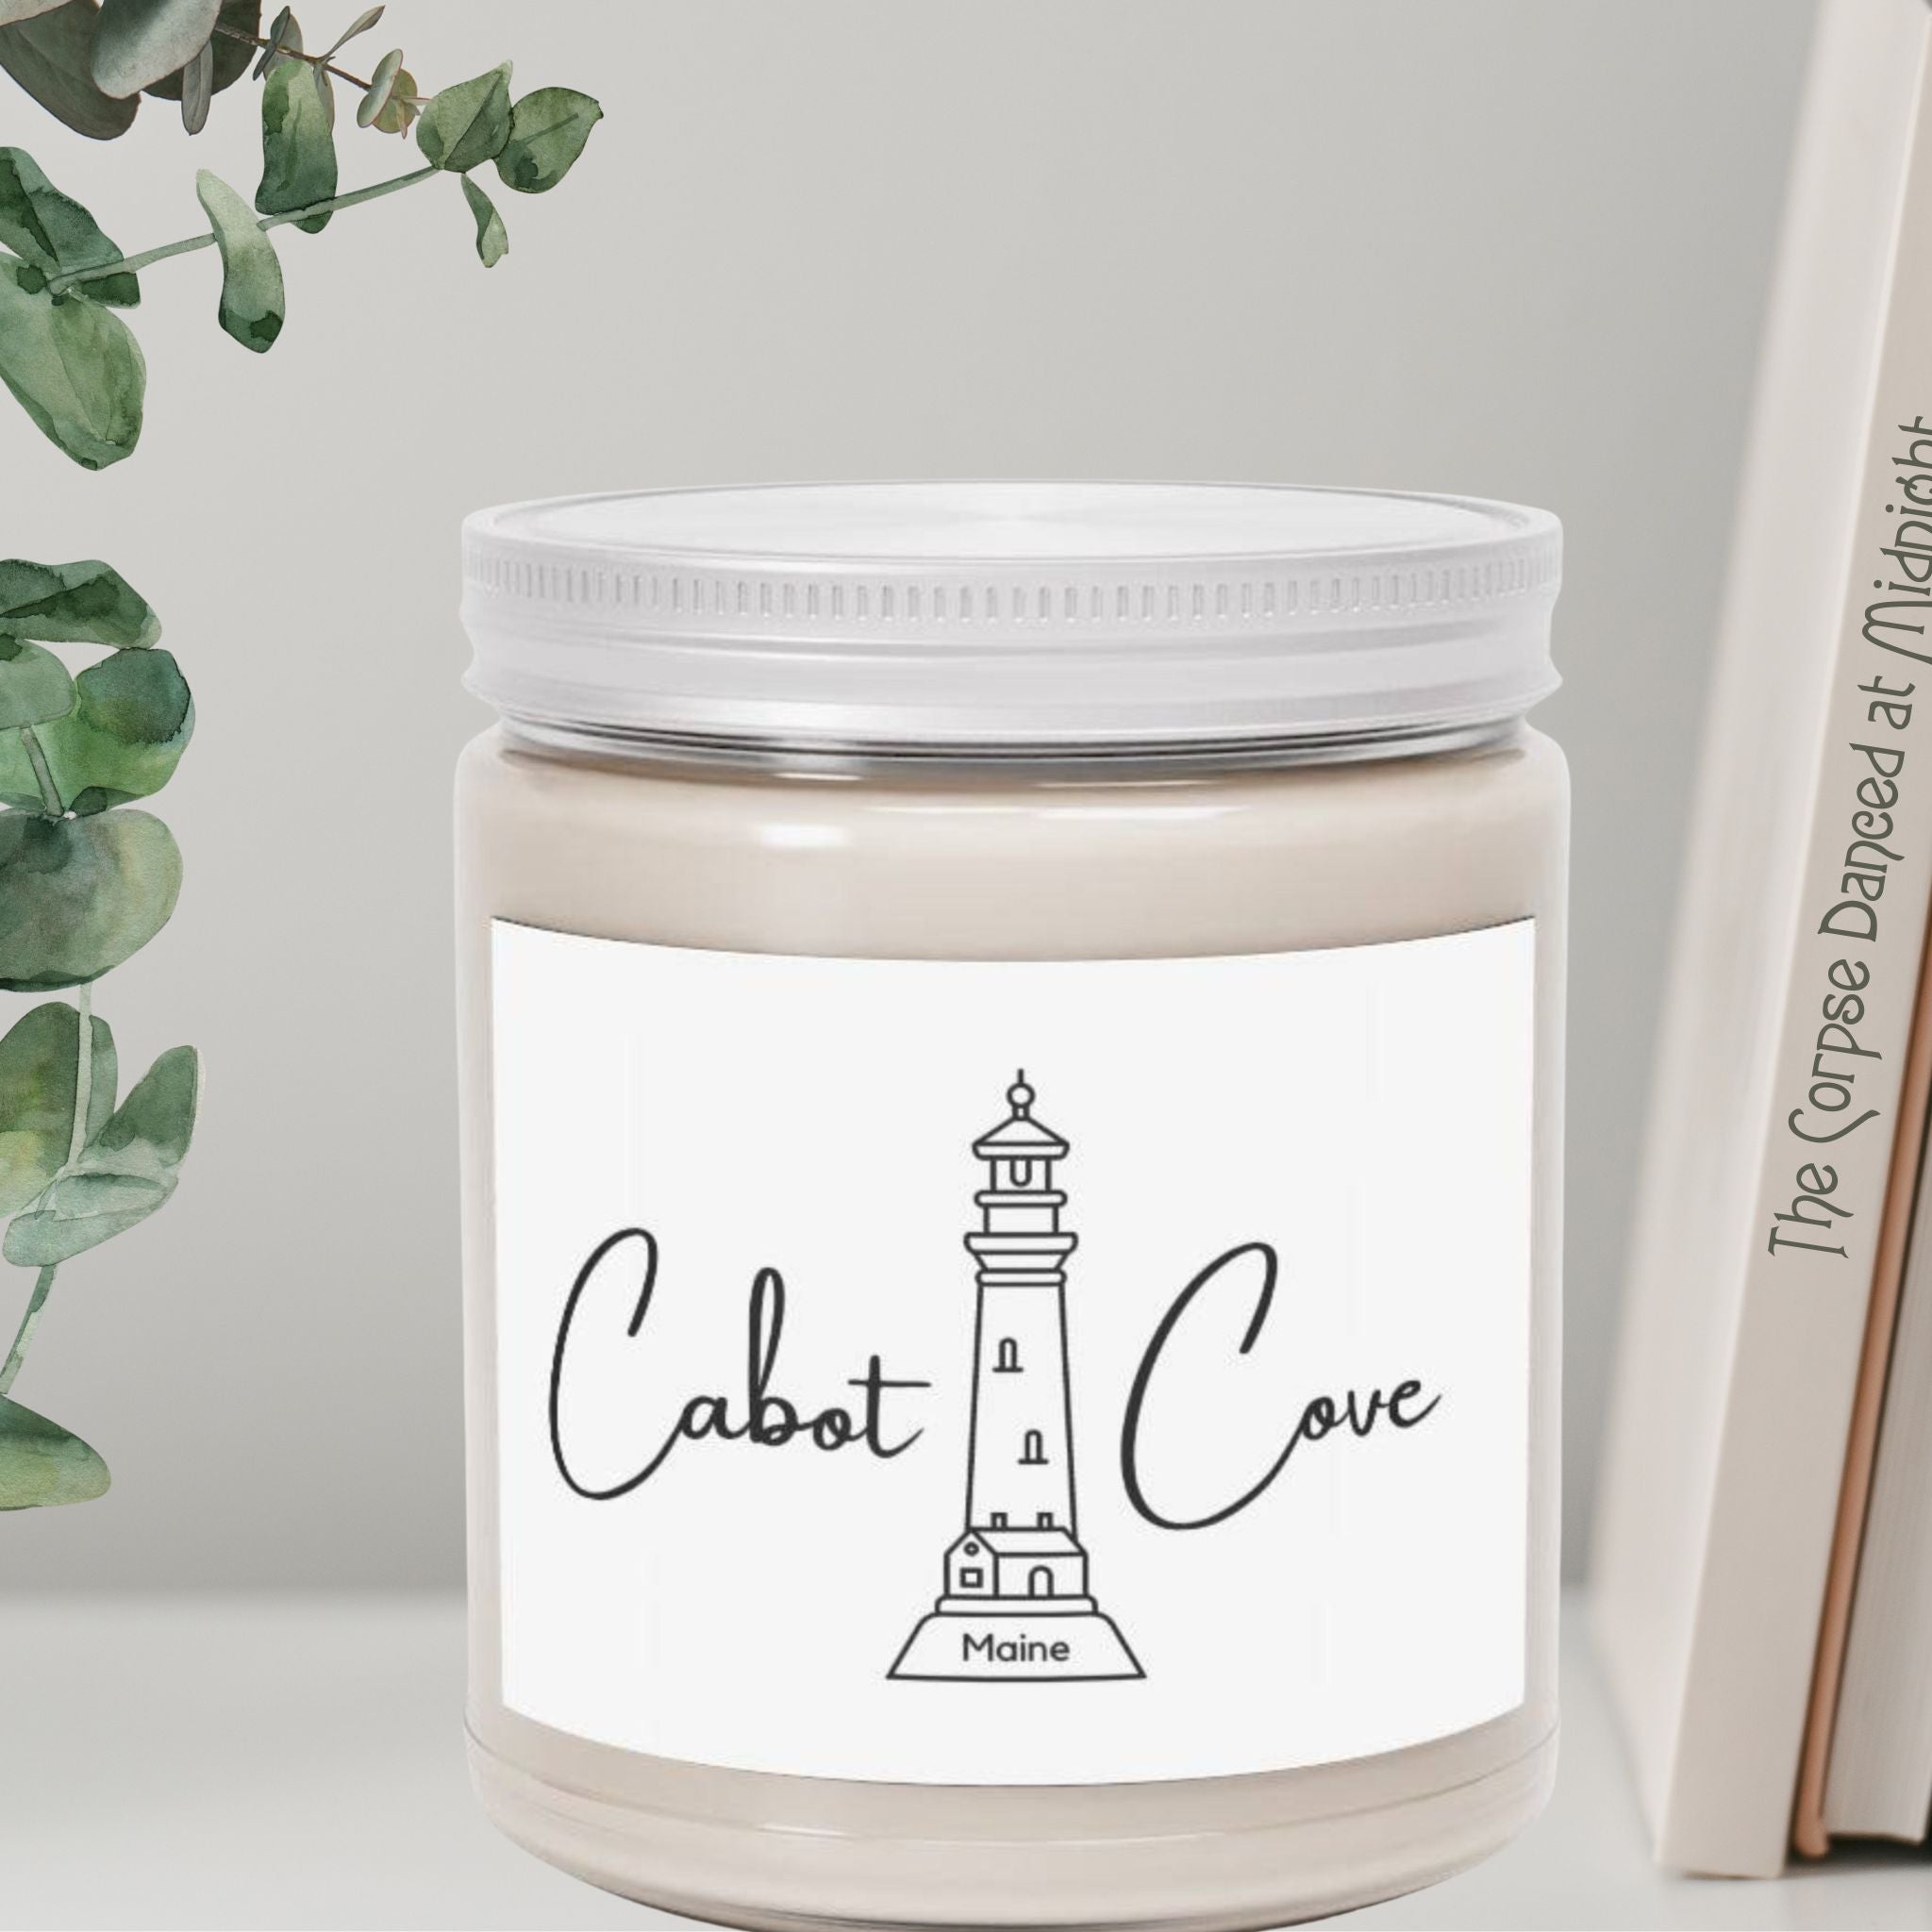 Cabot Cove Soy Candle Eco Friendly, Aromatherapy Scented, 9 oz 